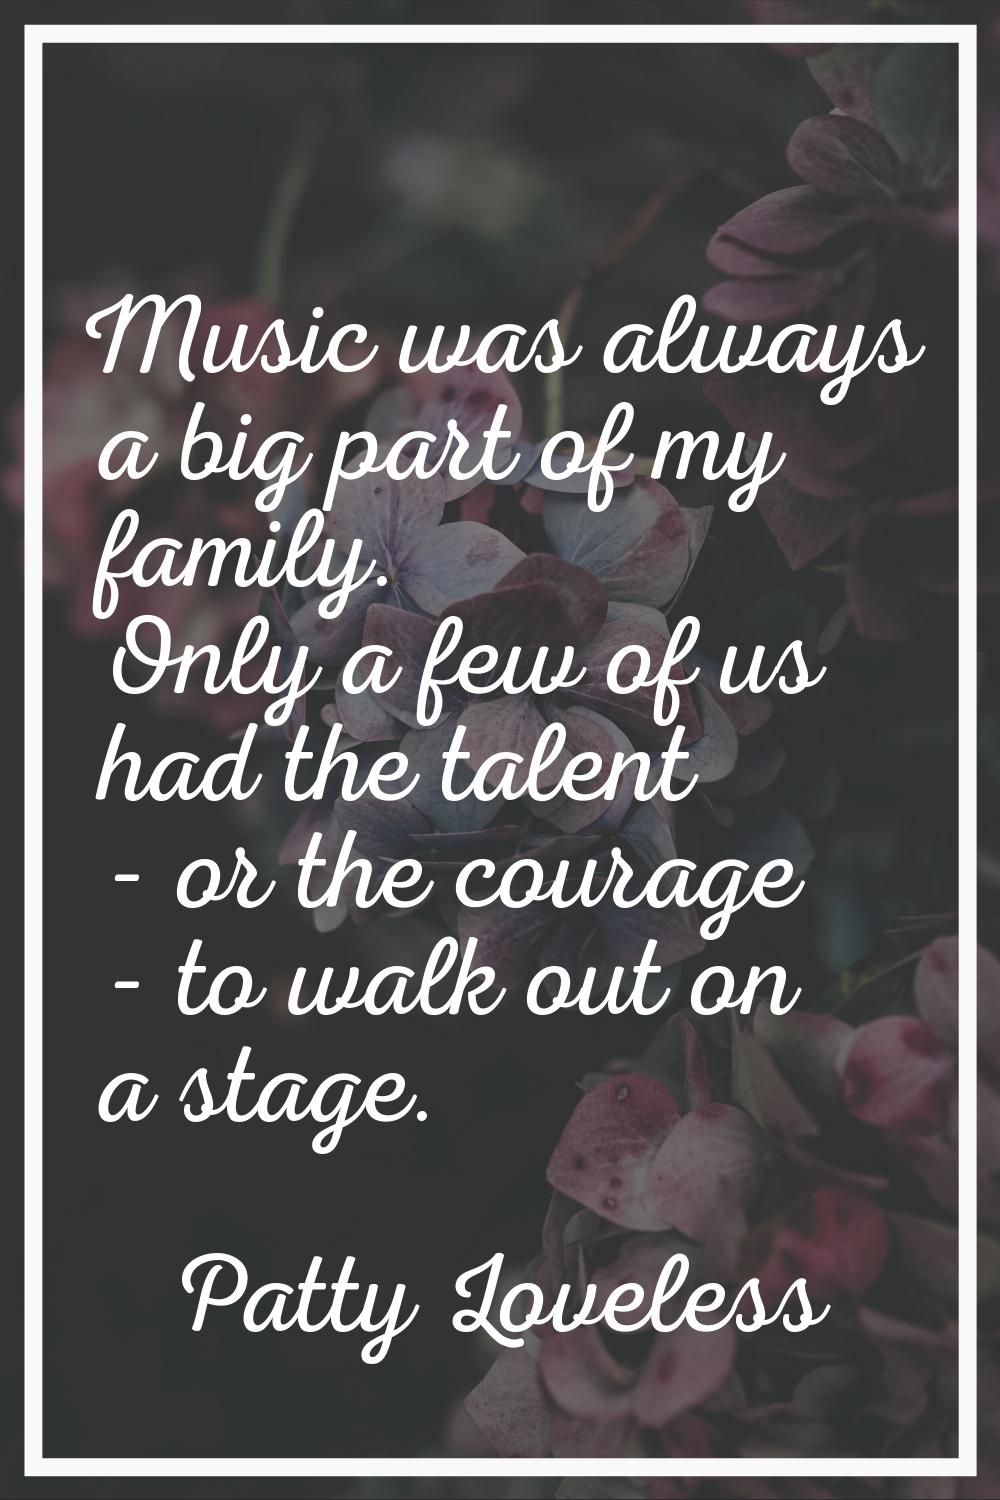 Music was always a big part of my family. Only a few of us had the talent - or the courage - to wal